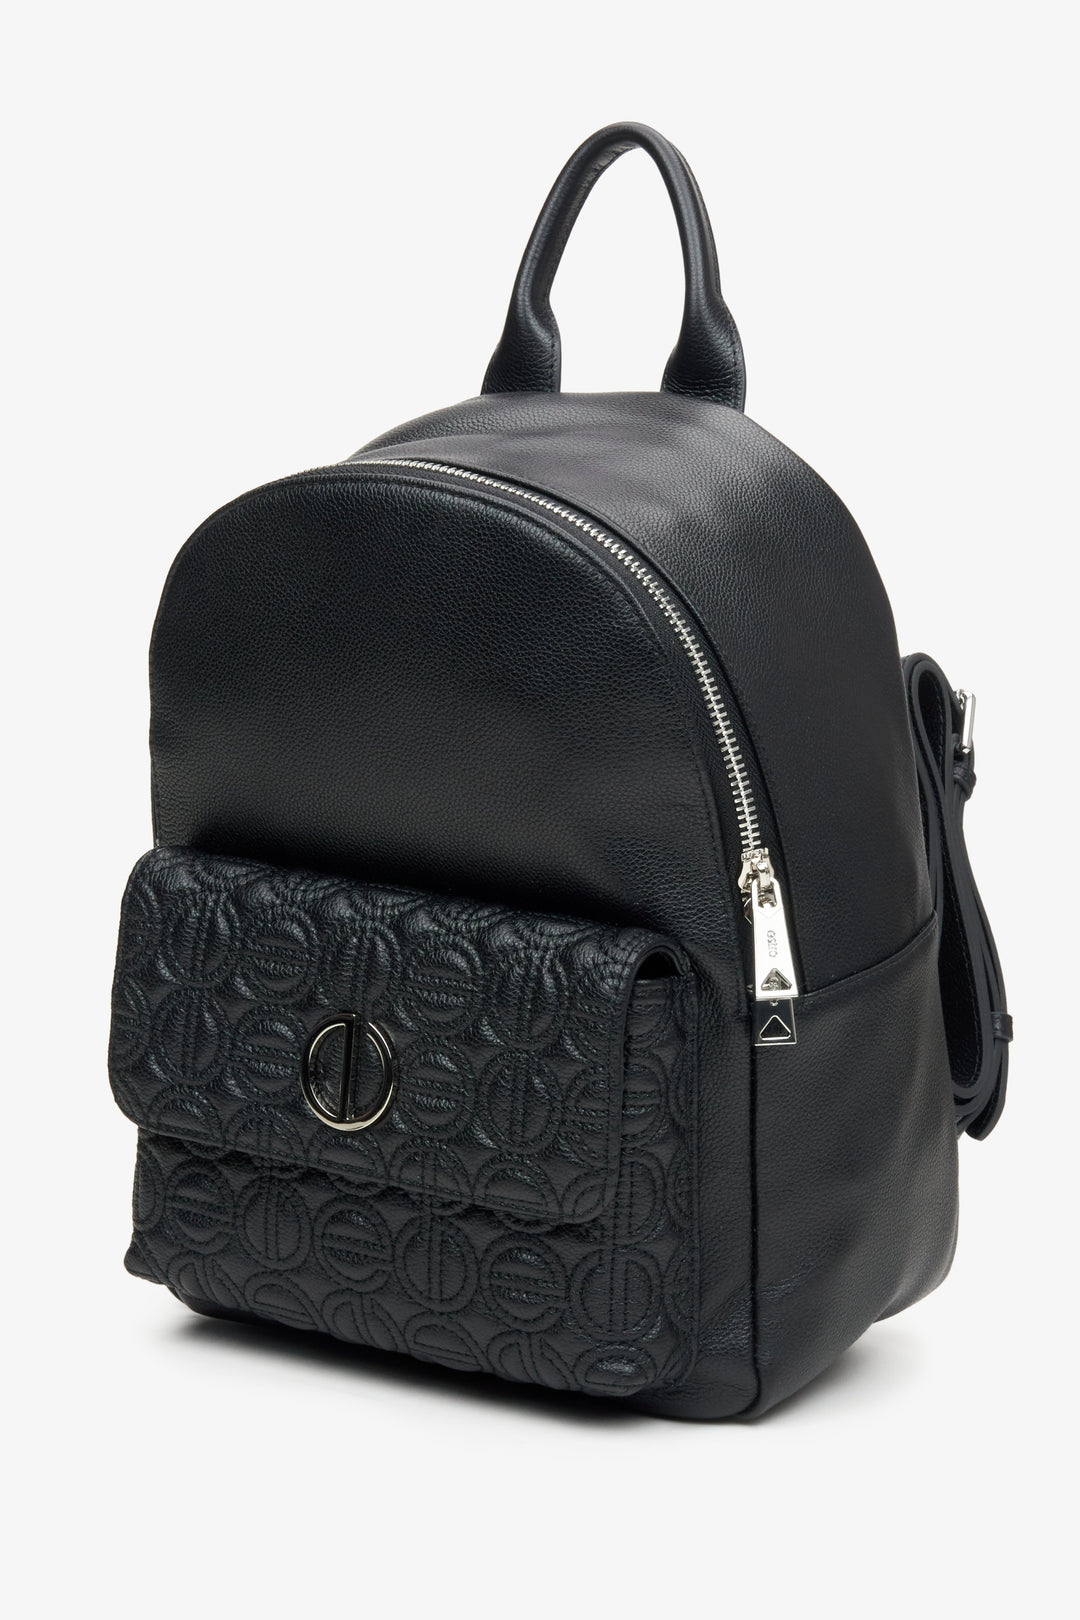 Women's black leather backpack with long straps by Estro.